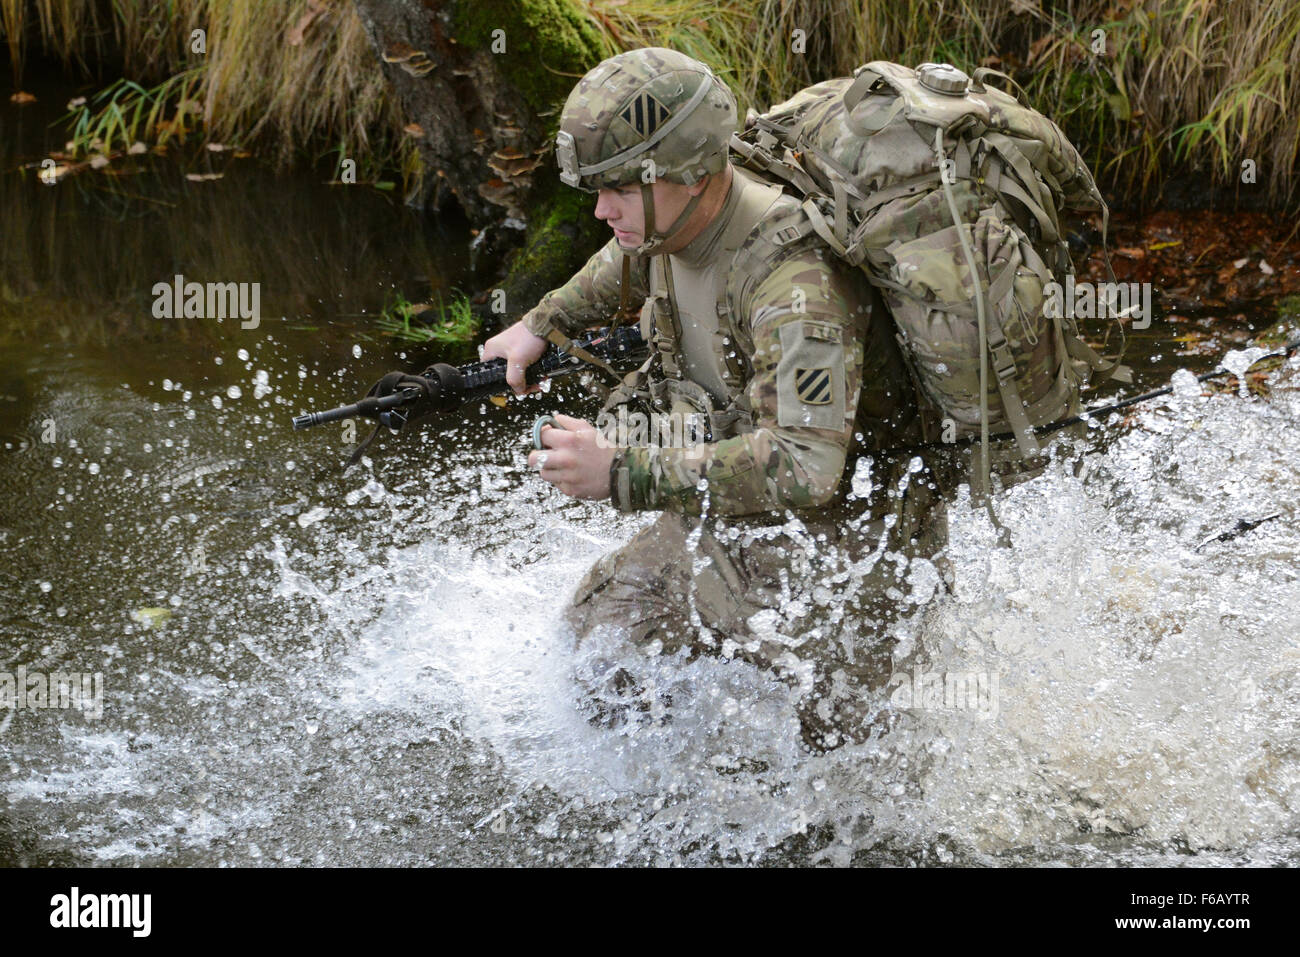 A U.S. Soldier, assigned to 1st Armored Brigade Combat Team, 3rd Infantry Division, conducts the rope bridge water crossing lane during the European Best Squad Competition at the 7th Army Joint Multinational Training Command, Grafenwoehr training area, Bavaria, Germany, Oct. 20, 2015. The European Best Squad Competition is an Army Europe competition challenging militaries from across Europe to compete and enhance teamwork with Allies and partner nations.  (U.S. Army photo by Visual Information Specialist Gertrud Zach/released) Stock Photo